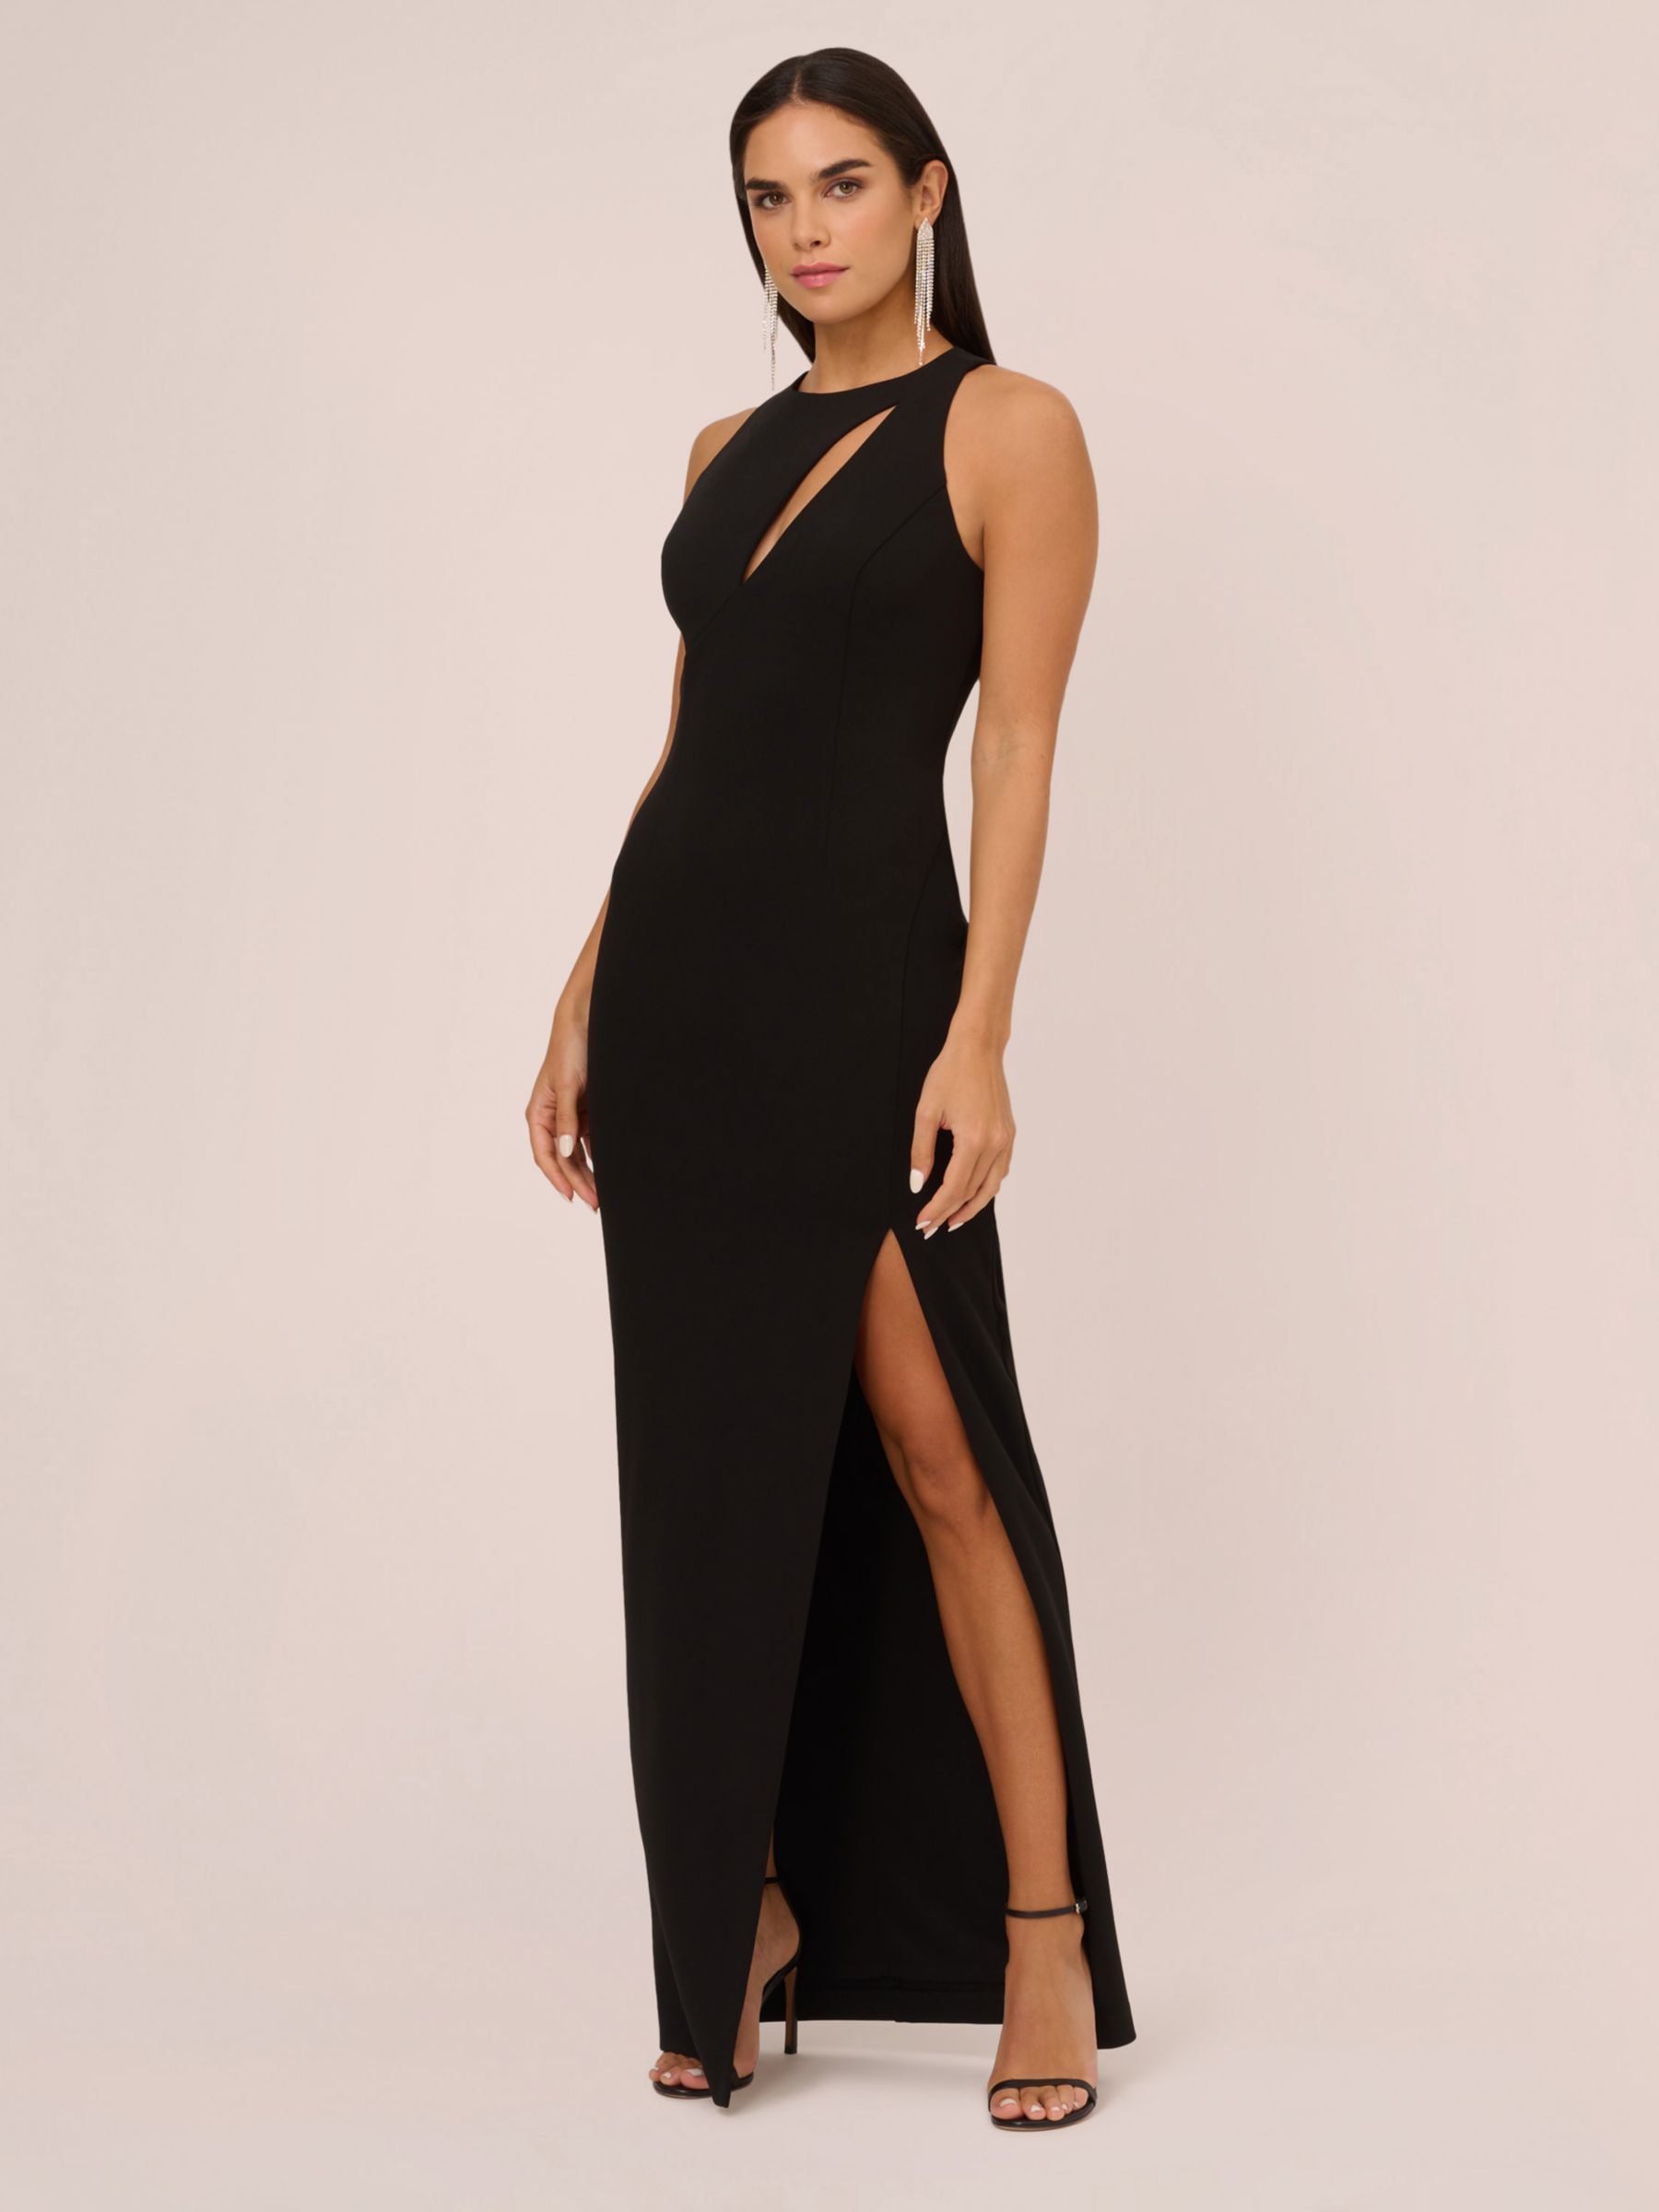 Adrianna Papell Aidan by Adrianna Papell Sleeveless Knit Crepe Gown ...